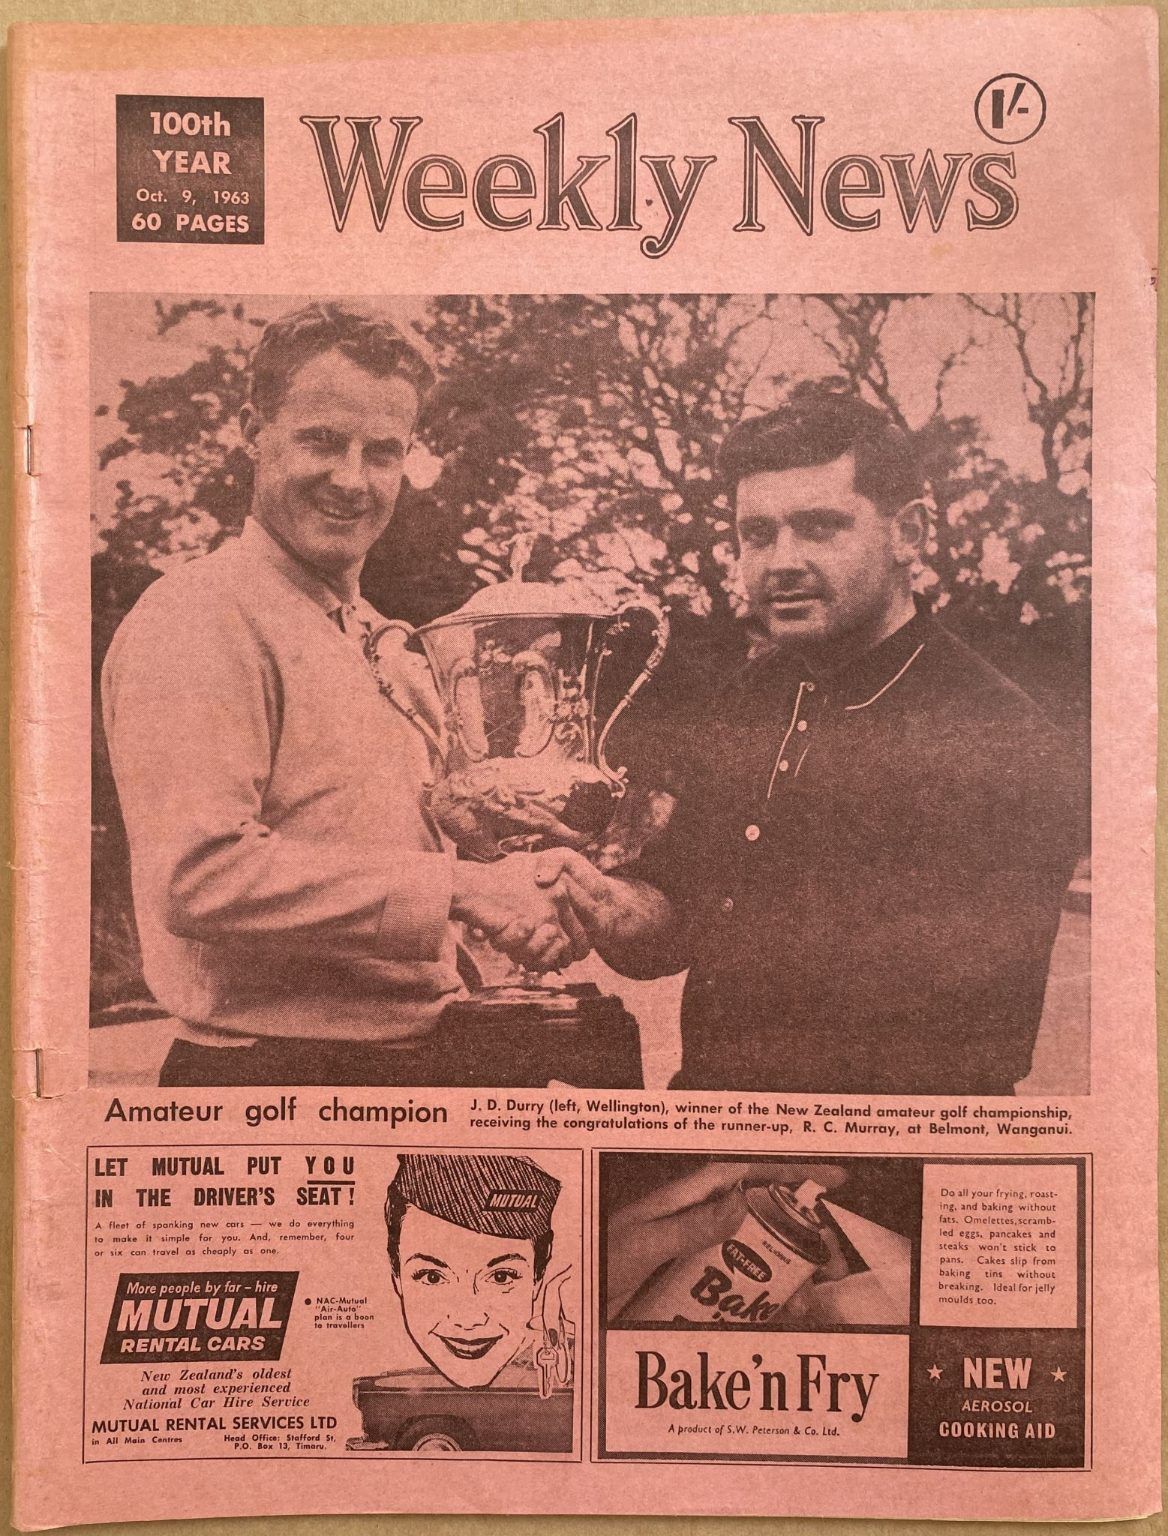 OLD NEWSPAPER: The Weekly News, No. 5211, 9 October 1963